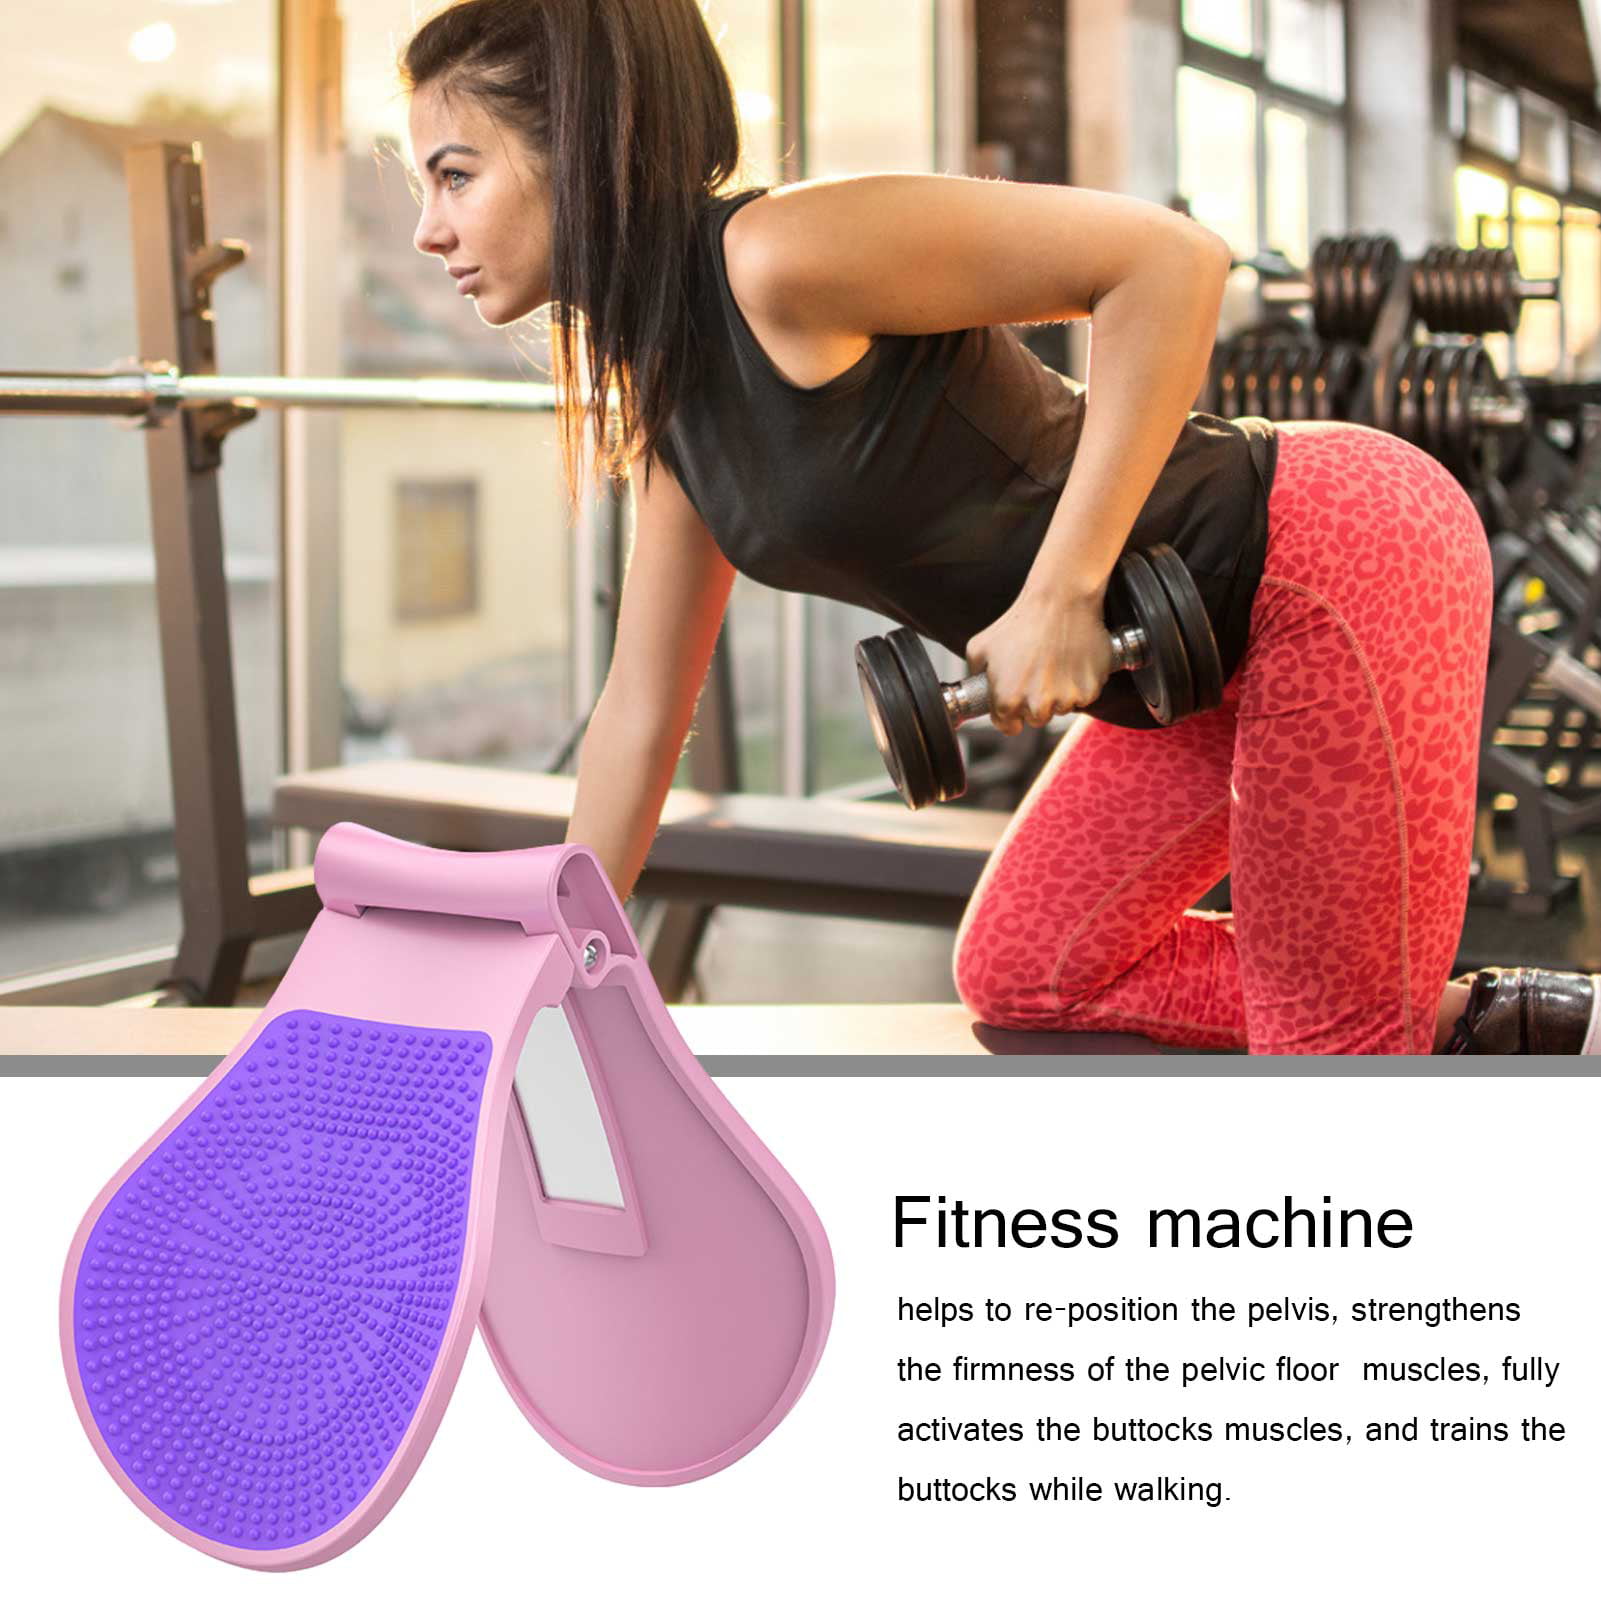 Muscle Correction Hip Trainer Pelvic Floor Muscle Great Gym Equipment at Home Or Travel Ideal Leg Exerciser,Blue 